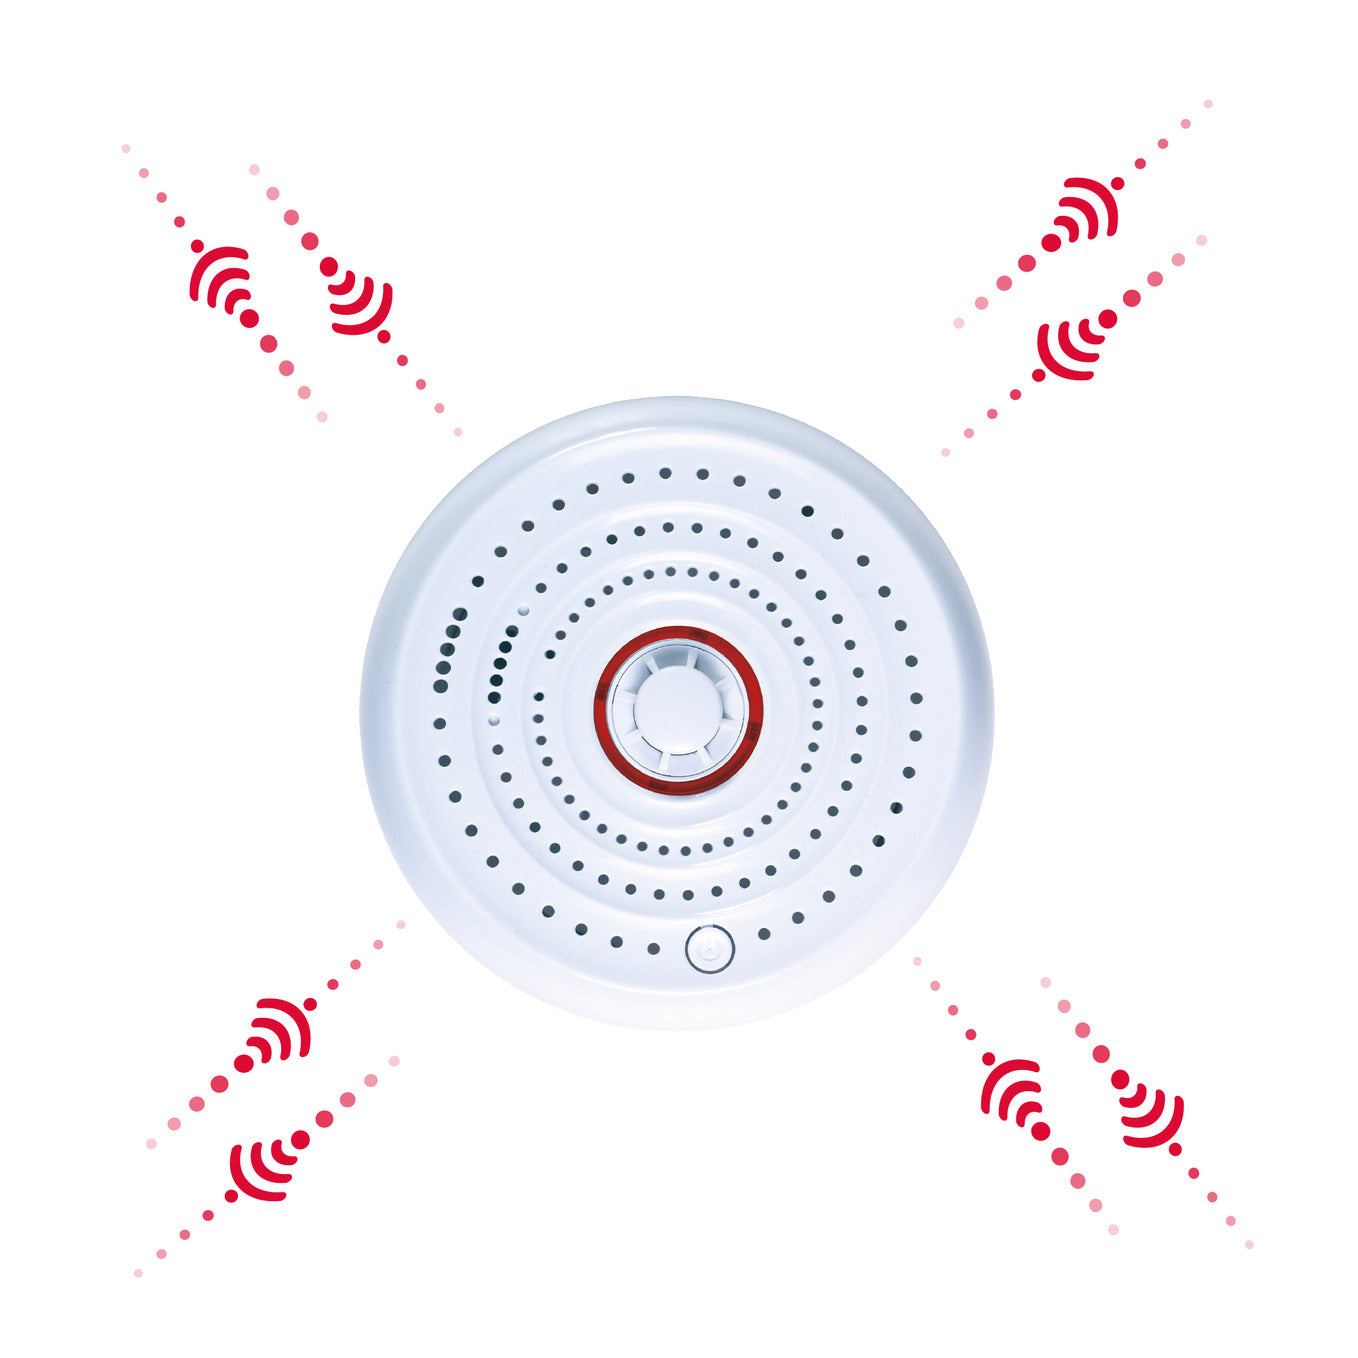 Firexo Interlinked Optical Smoke Alarm, Heat Alarm, and Carbon Monoxide Alarm Multipack all with 10 Year Tamper Proof Battery, White, Contains 1x Smoke Alarm, 1x Heat Alarm, 1x Carbon Monoxide alarm